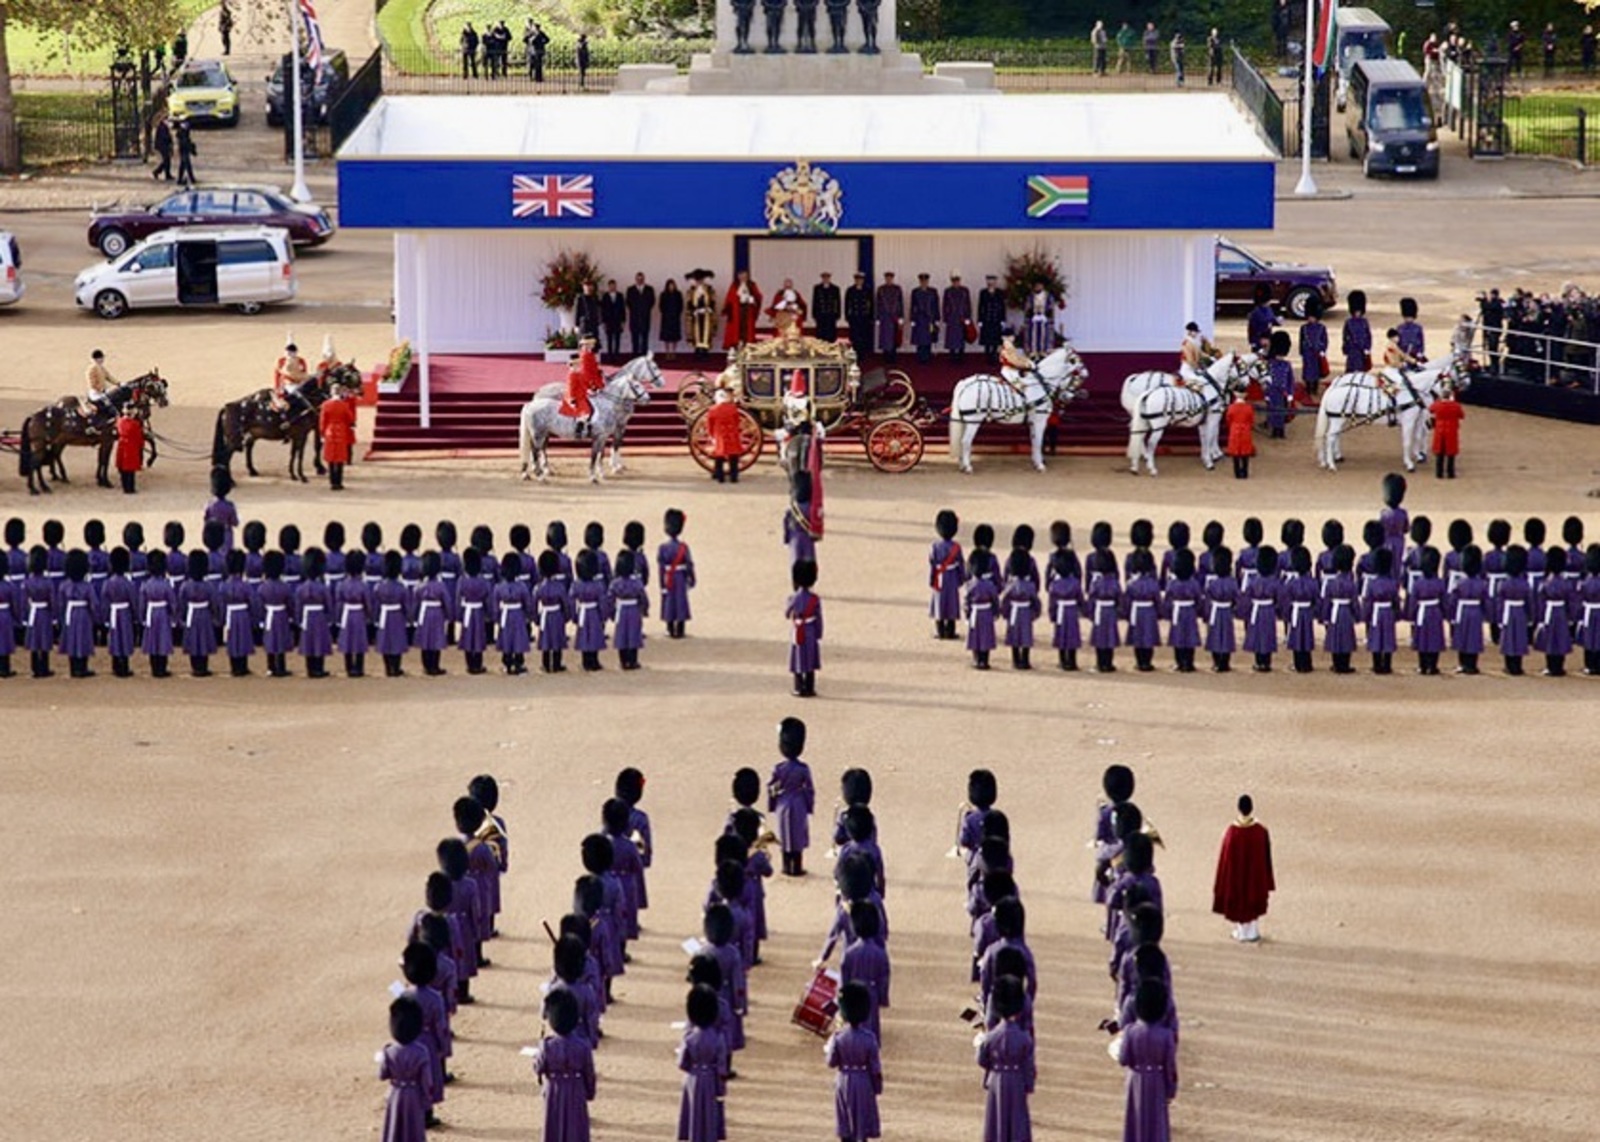 22 Nov 22 - Honoured to join HM the King in greeting President Ramaphosa at Horse Guard’s Parade